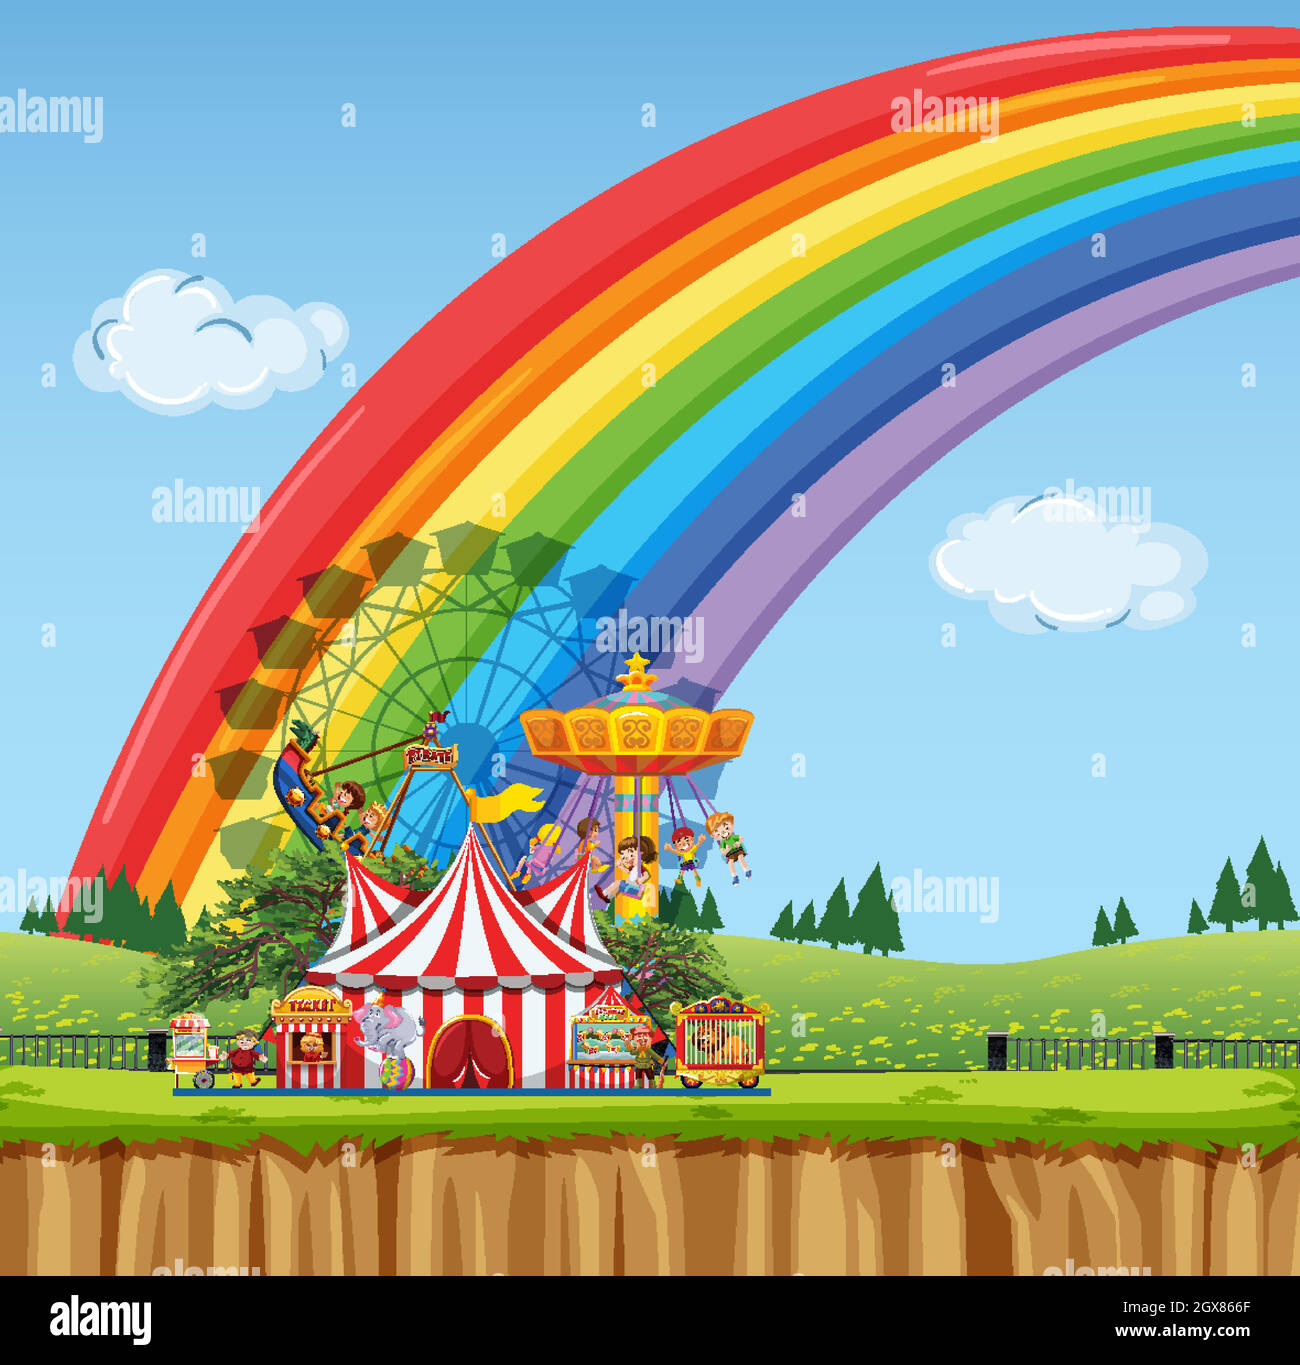 Circus scene with tent and many rides Stock Vector